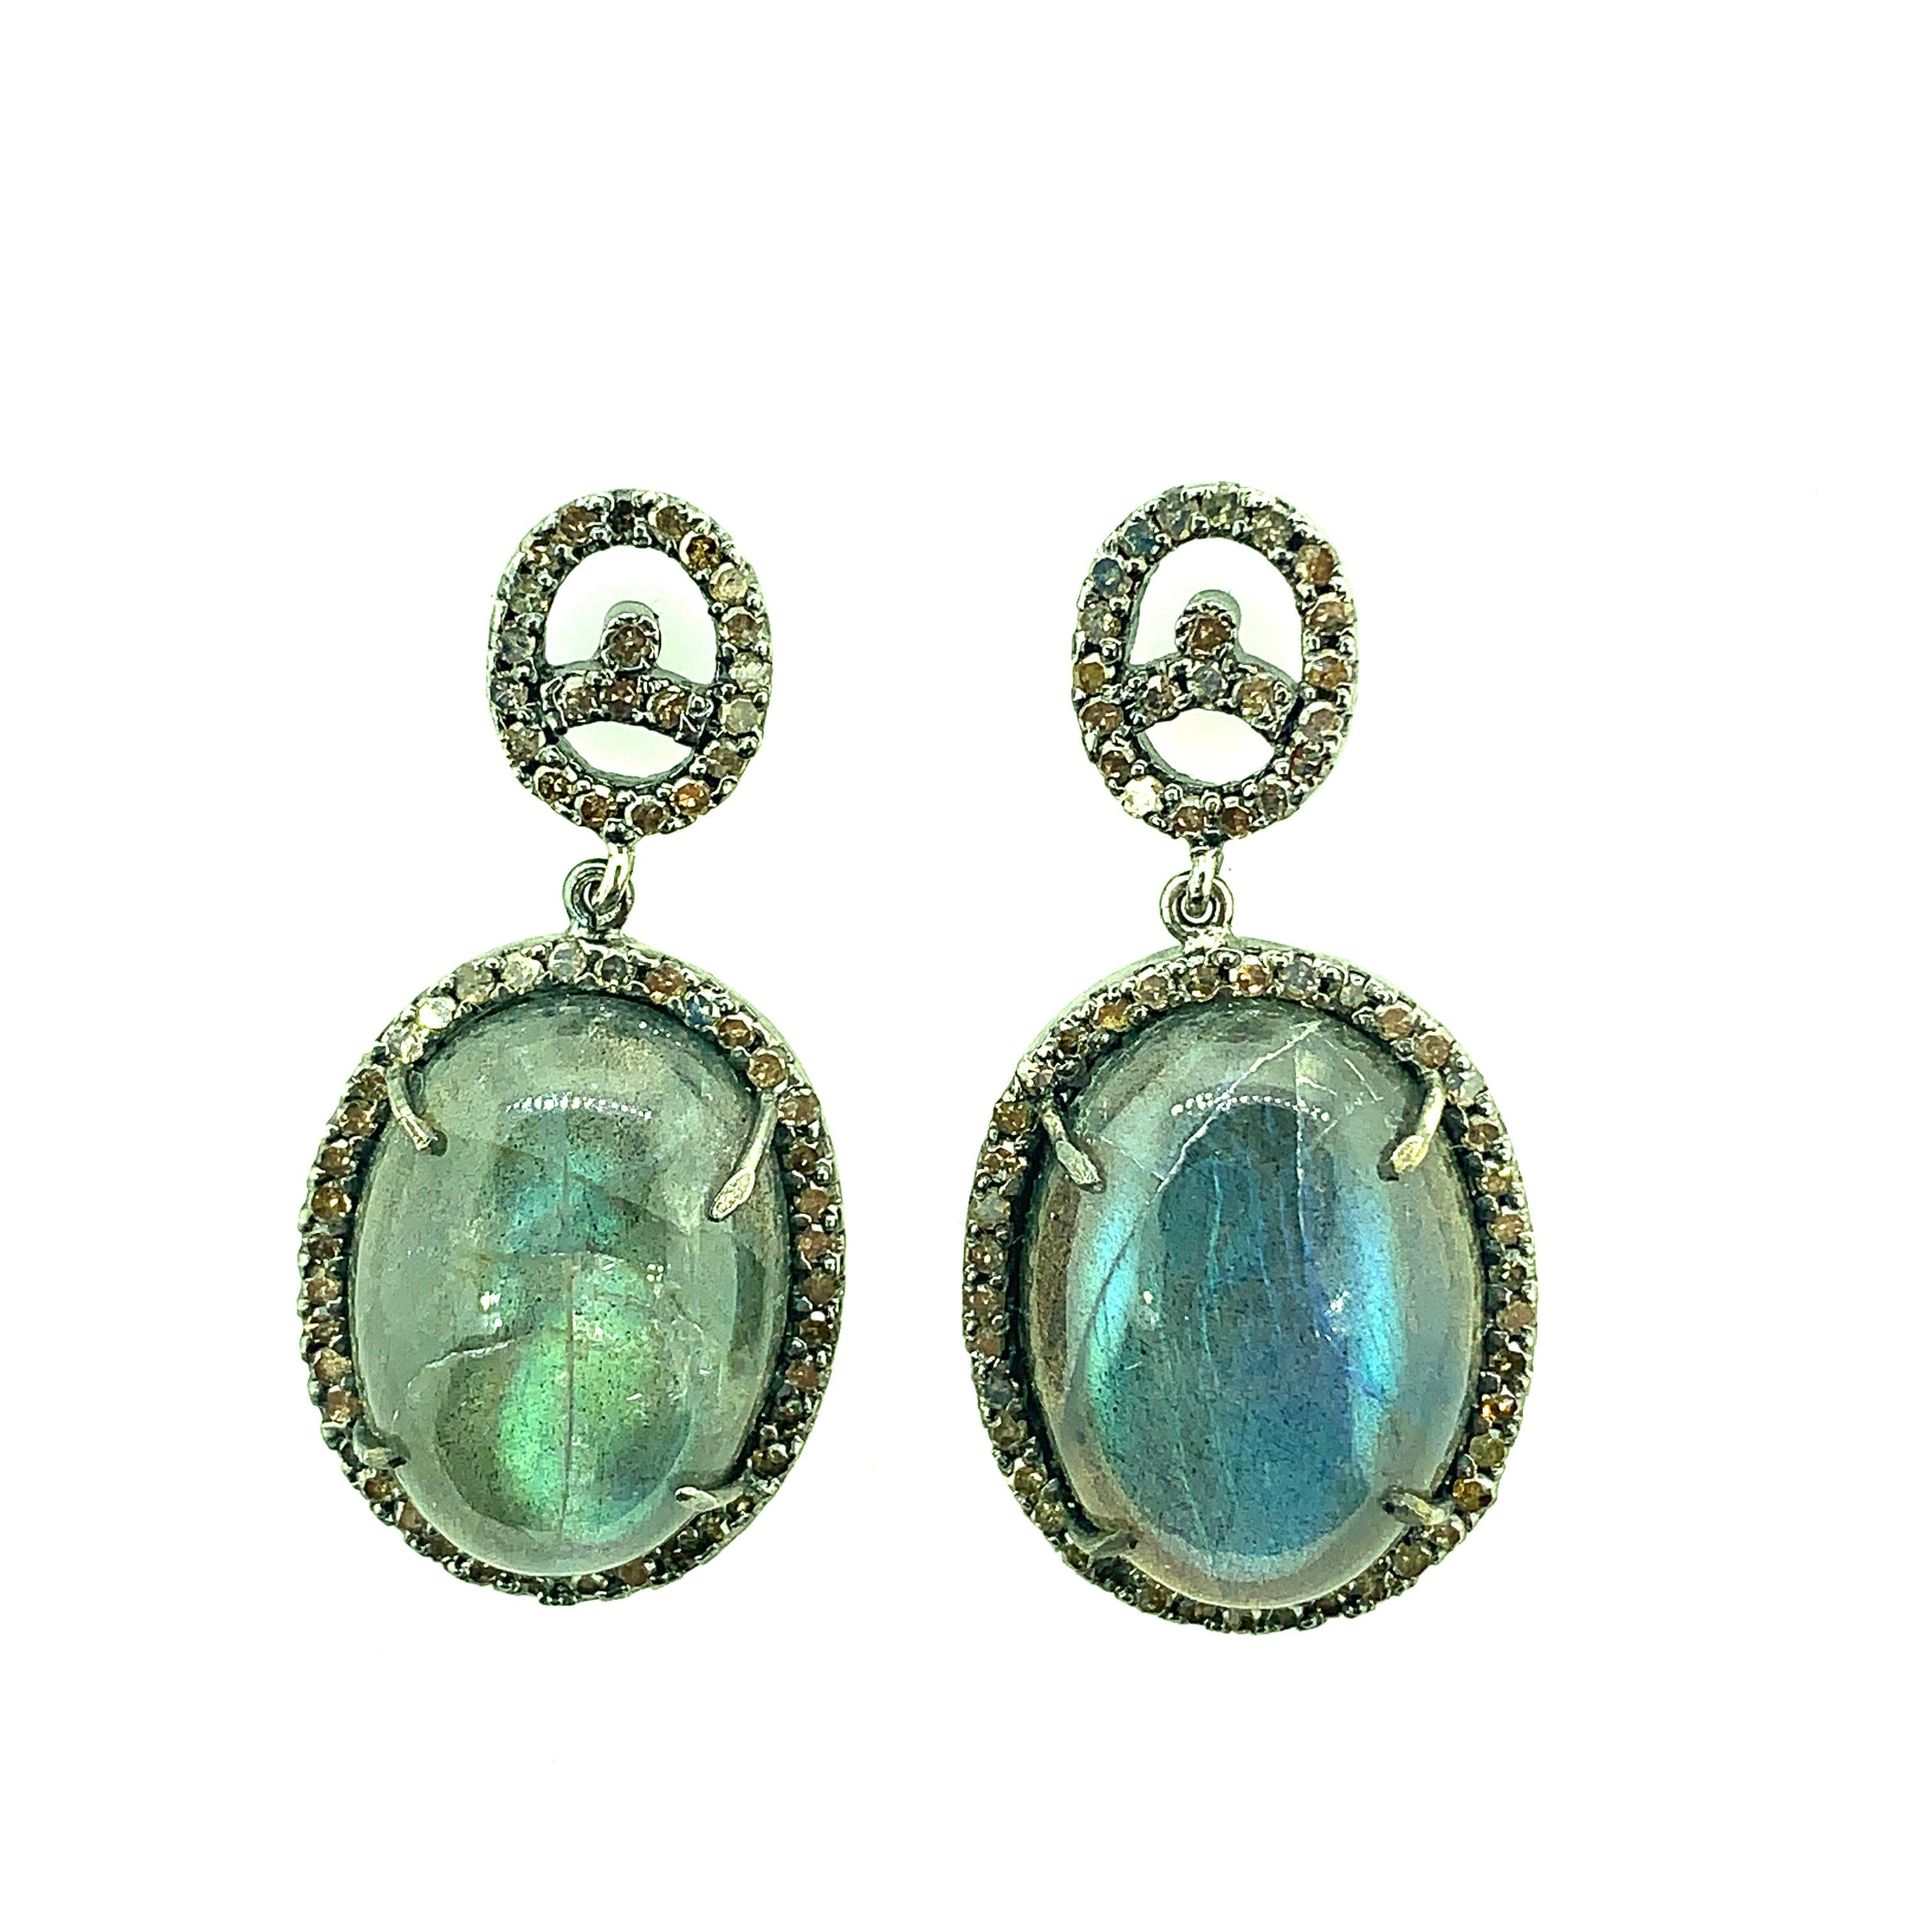 Contemporary 36.35 Carat Labradorite, Diamond Earring in Oxidized Sterling Silver, 14K Gold For Sale